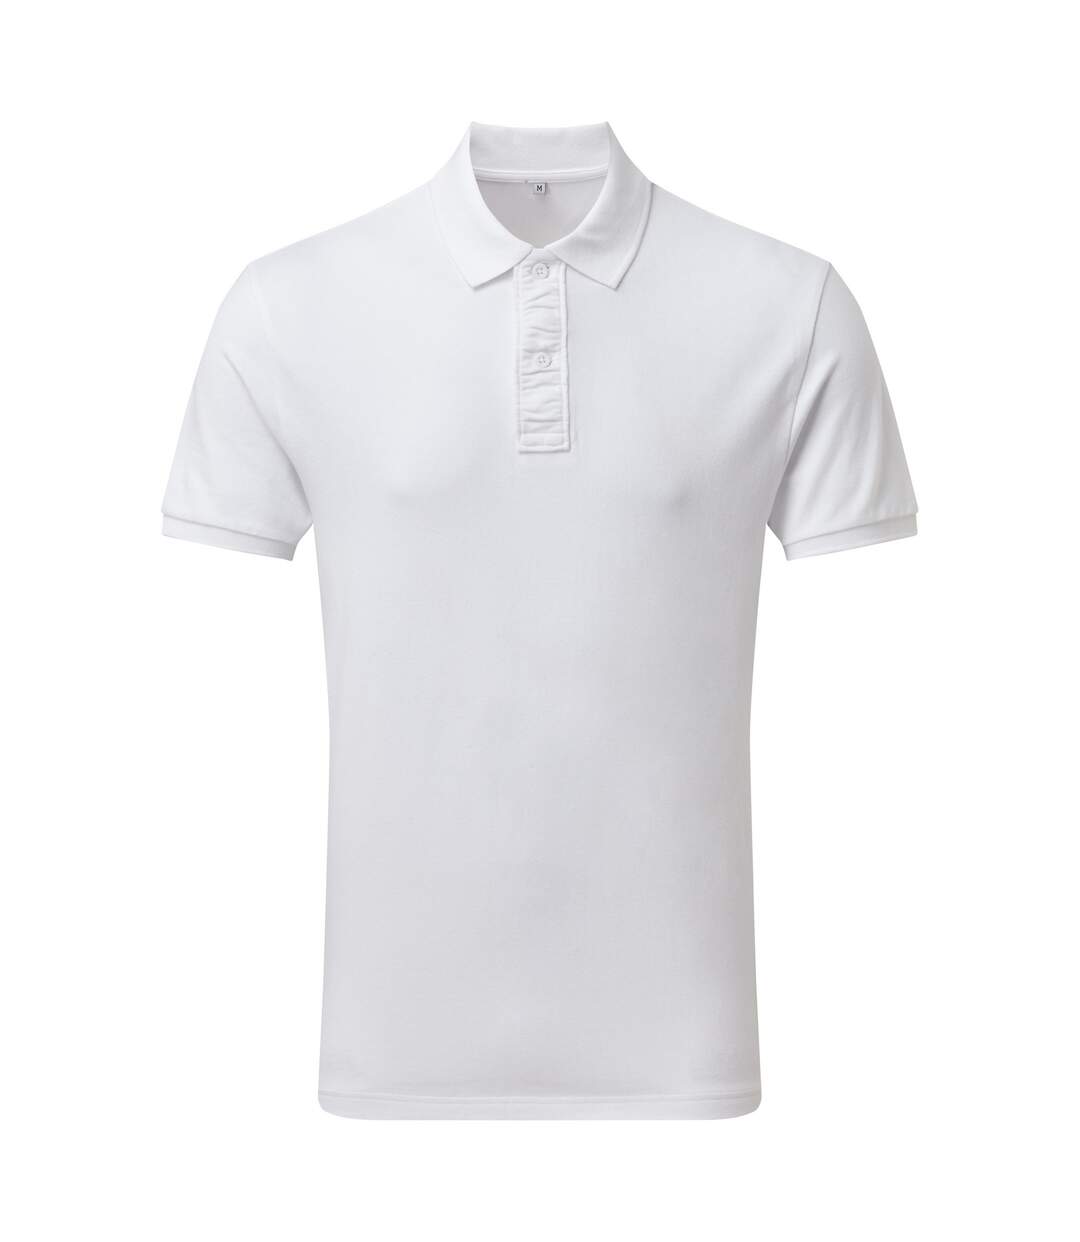 Asquith & Fox - Polo manches courtes INFINITY - Homme (Blanc) - UTRW6642